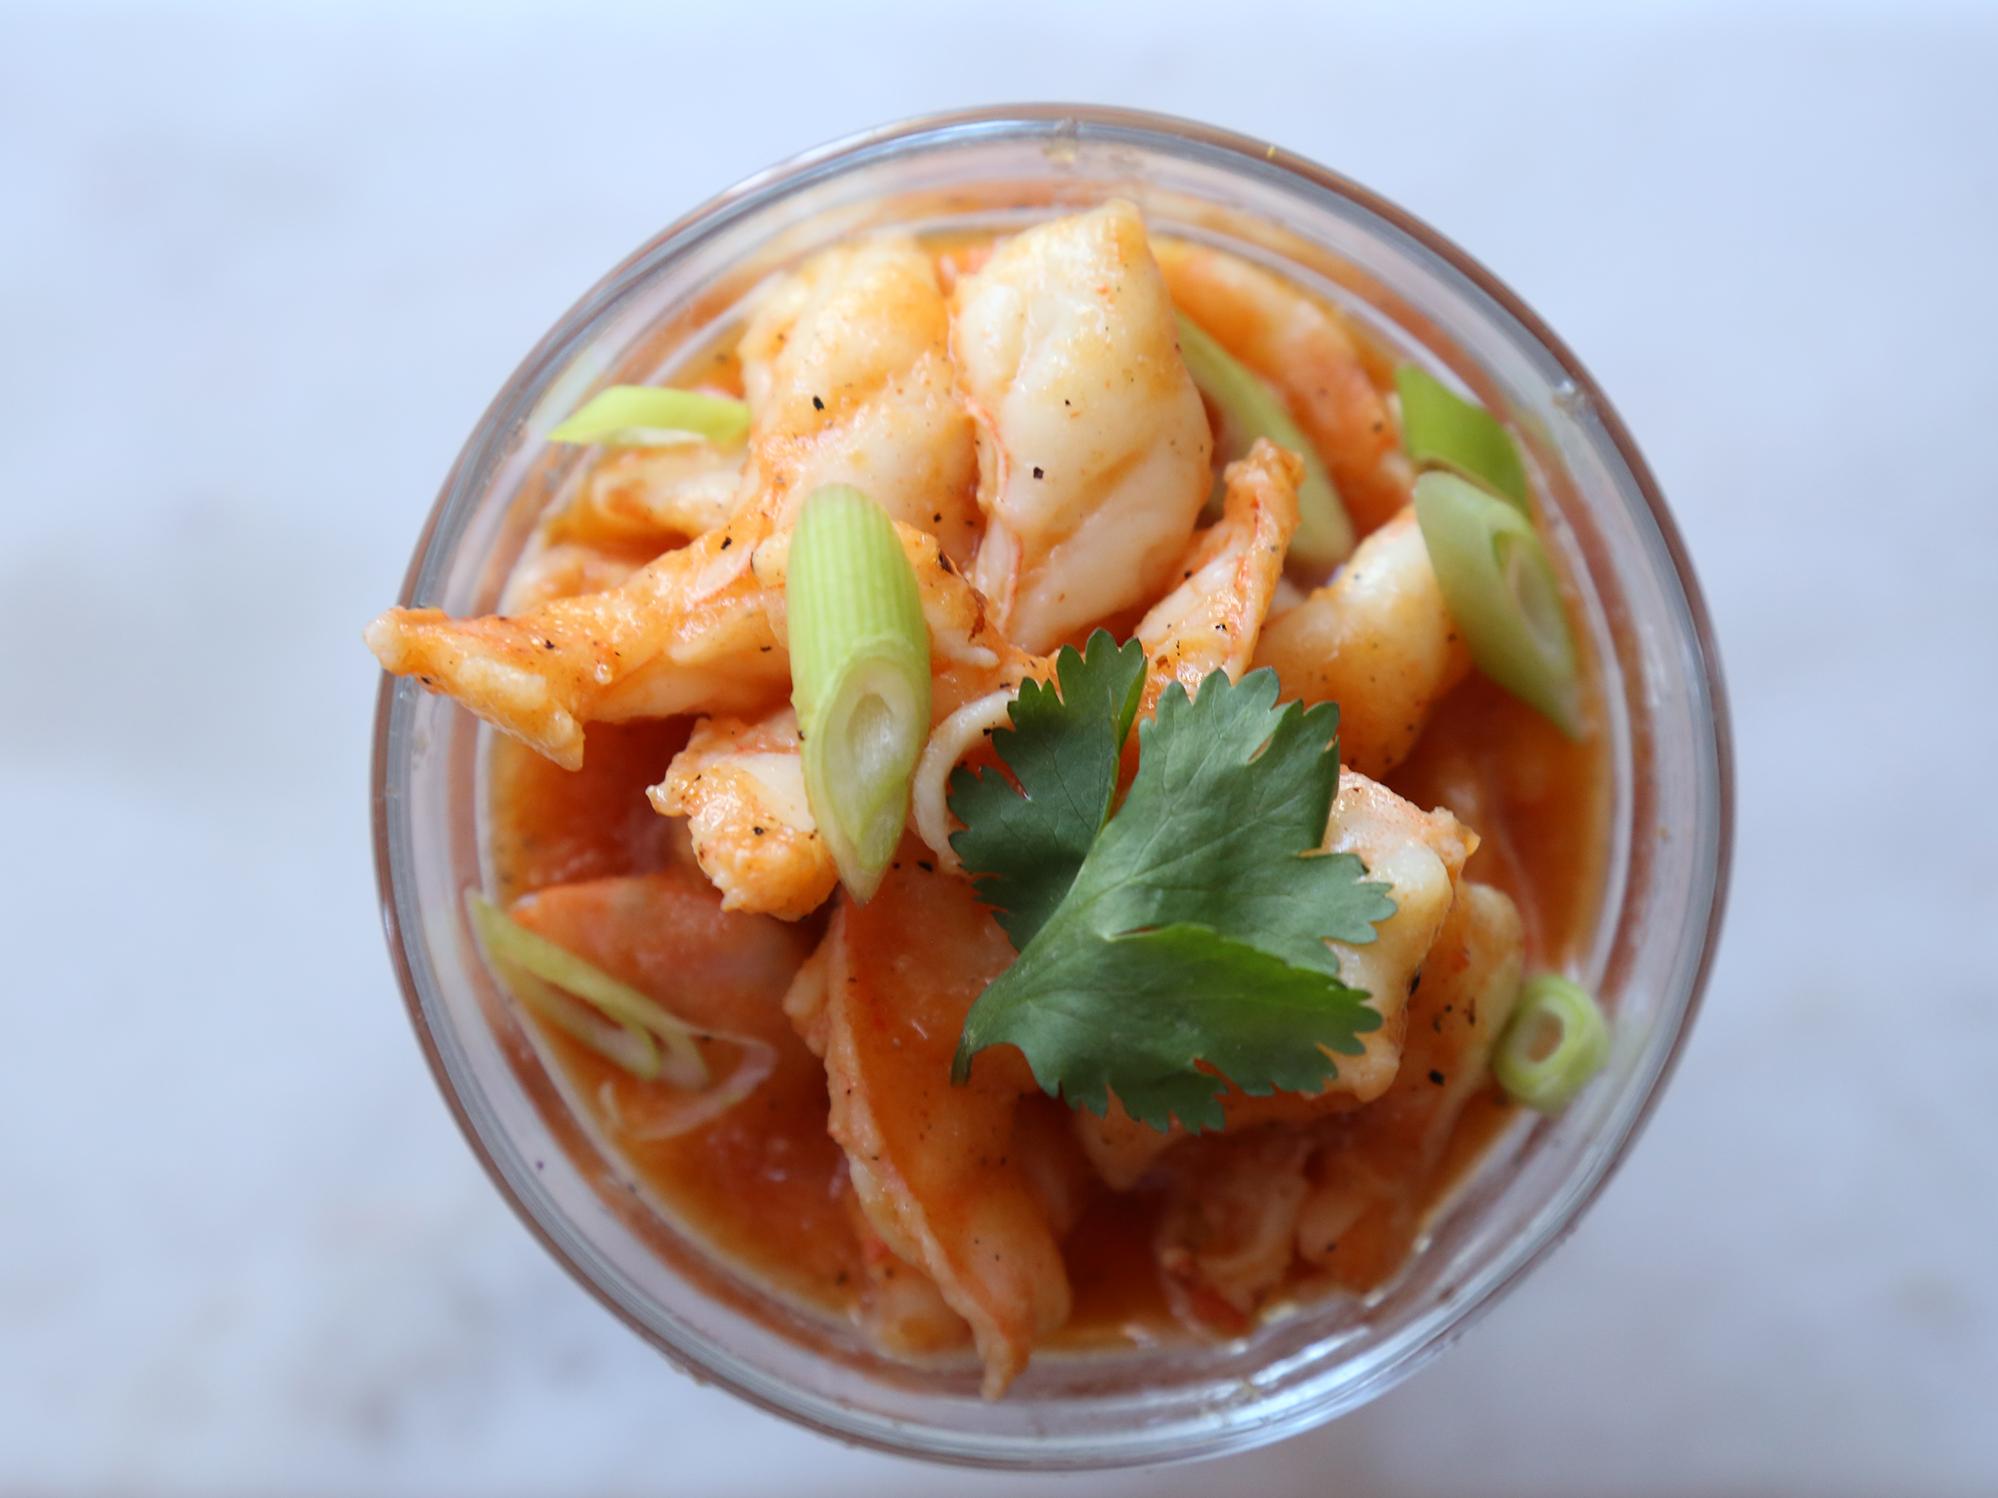  Perfectly cooked shrimp ready to be turned into a delicious Ecuadorian ceviche.